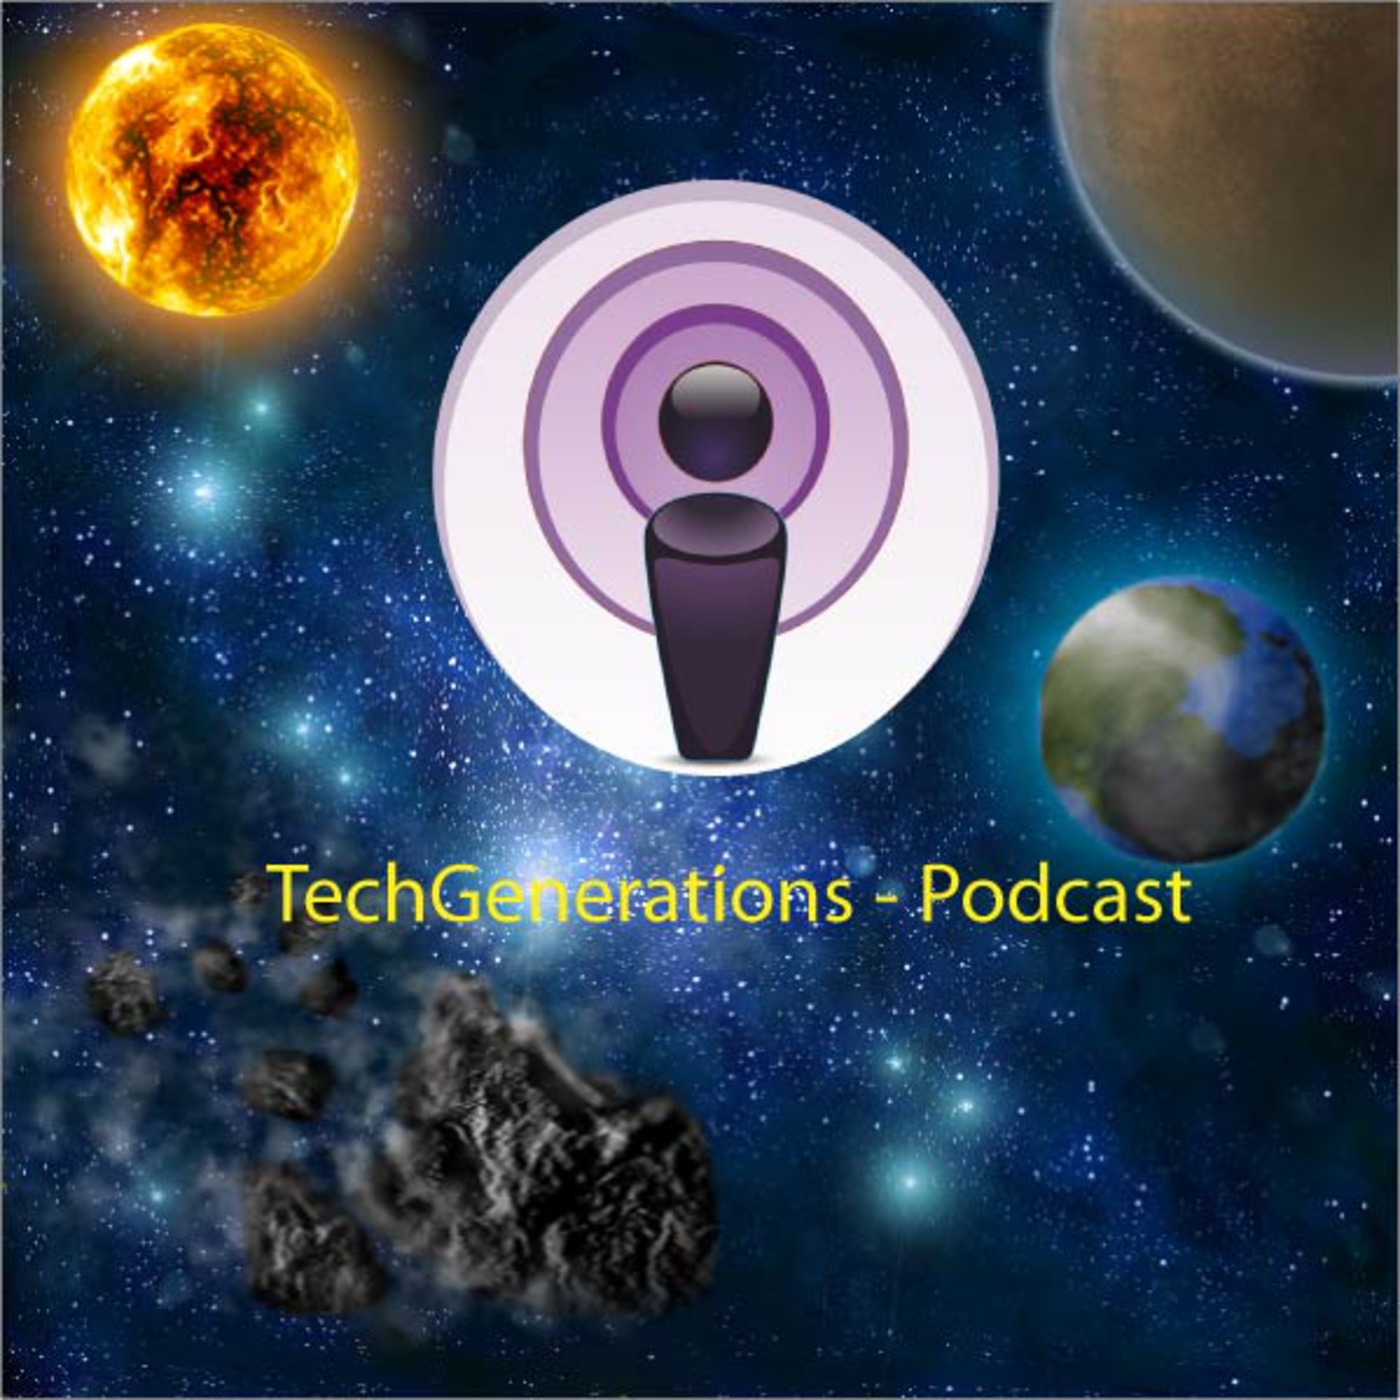 TechGenerations Podcasts!